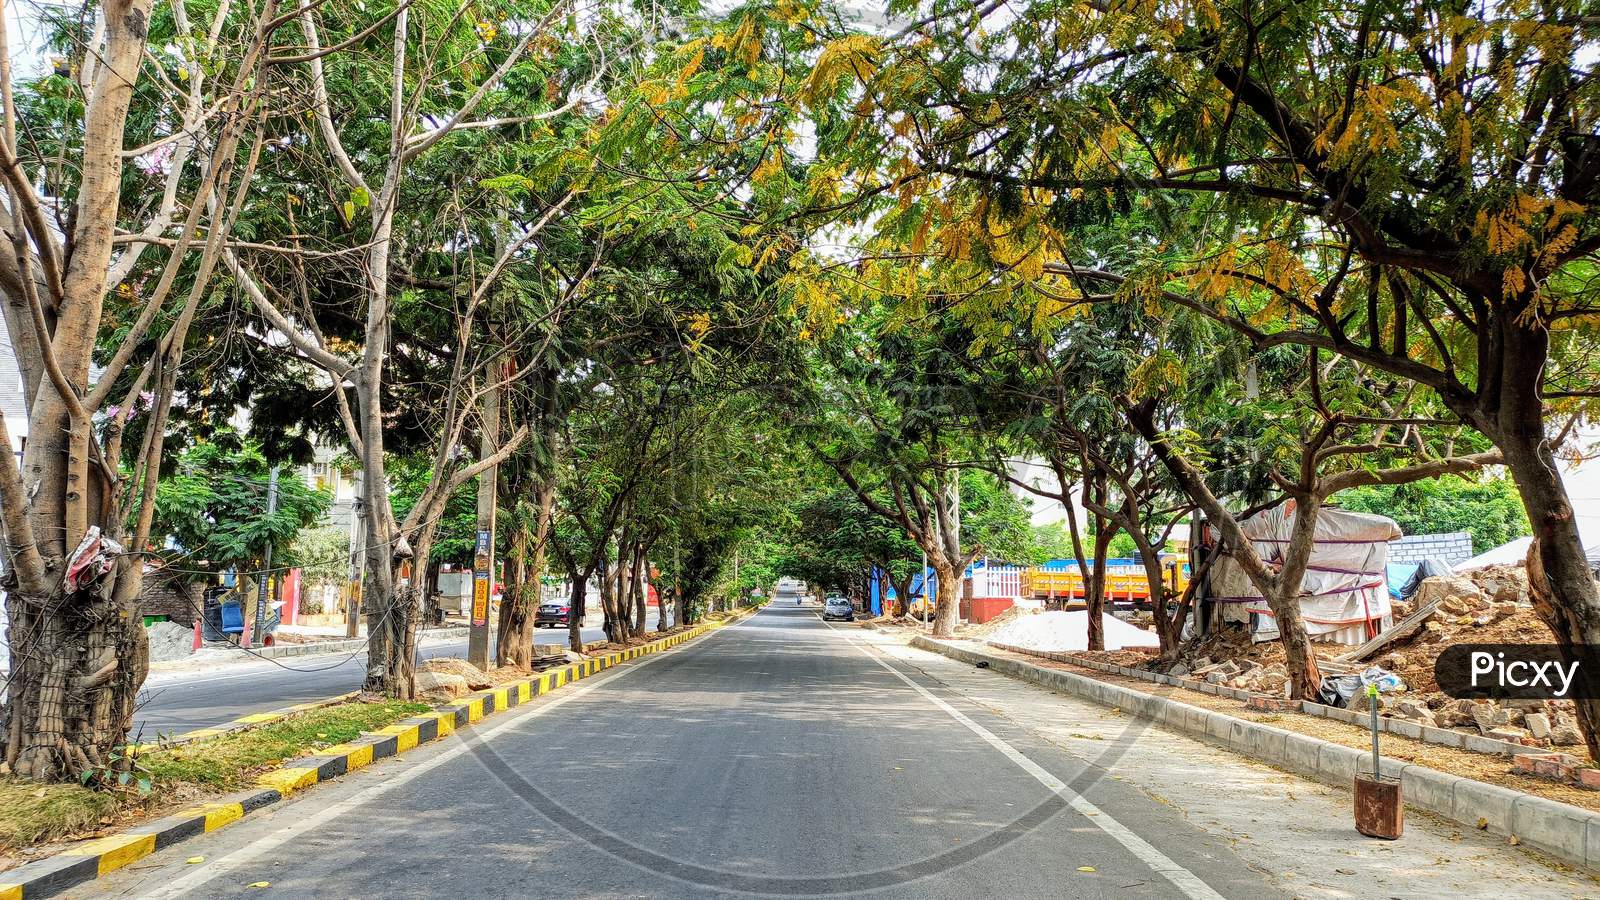 Empty Roads At KPHB Colony During Lockdown amid corona virus Covid 19 outbreak in India